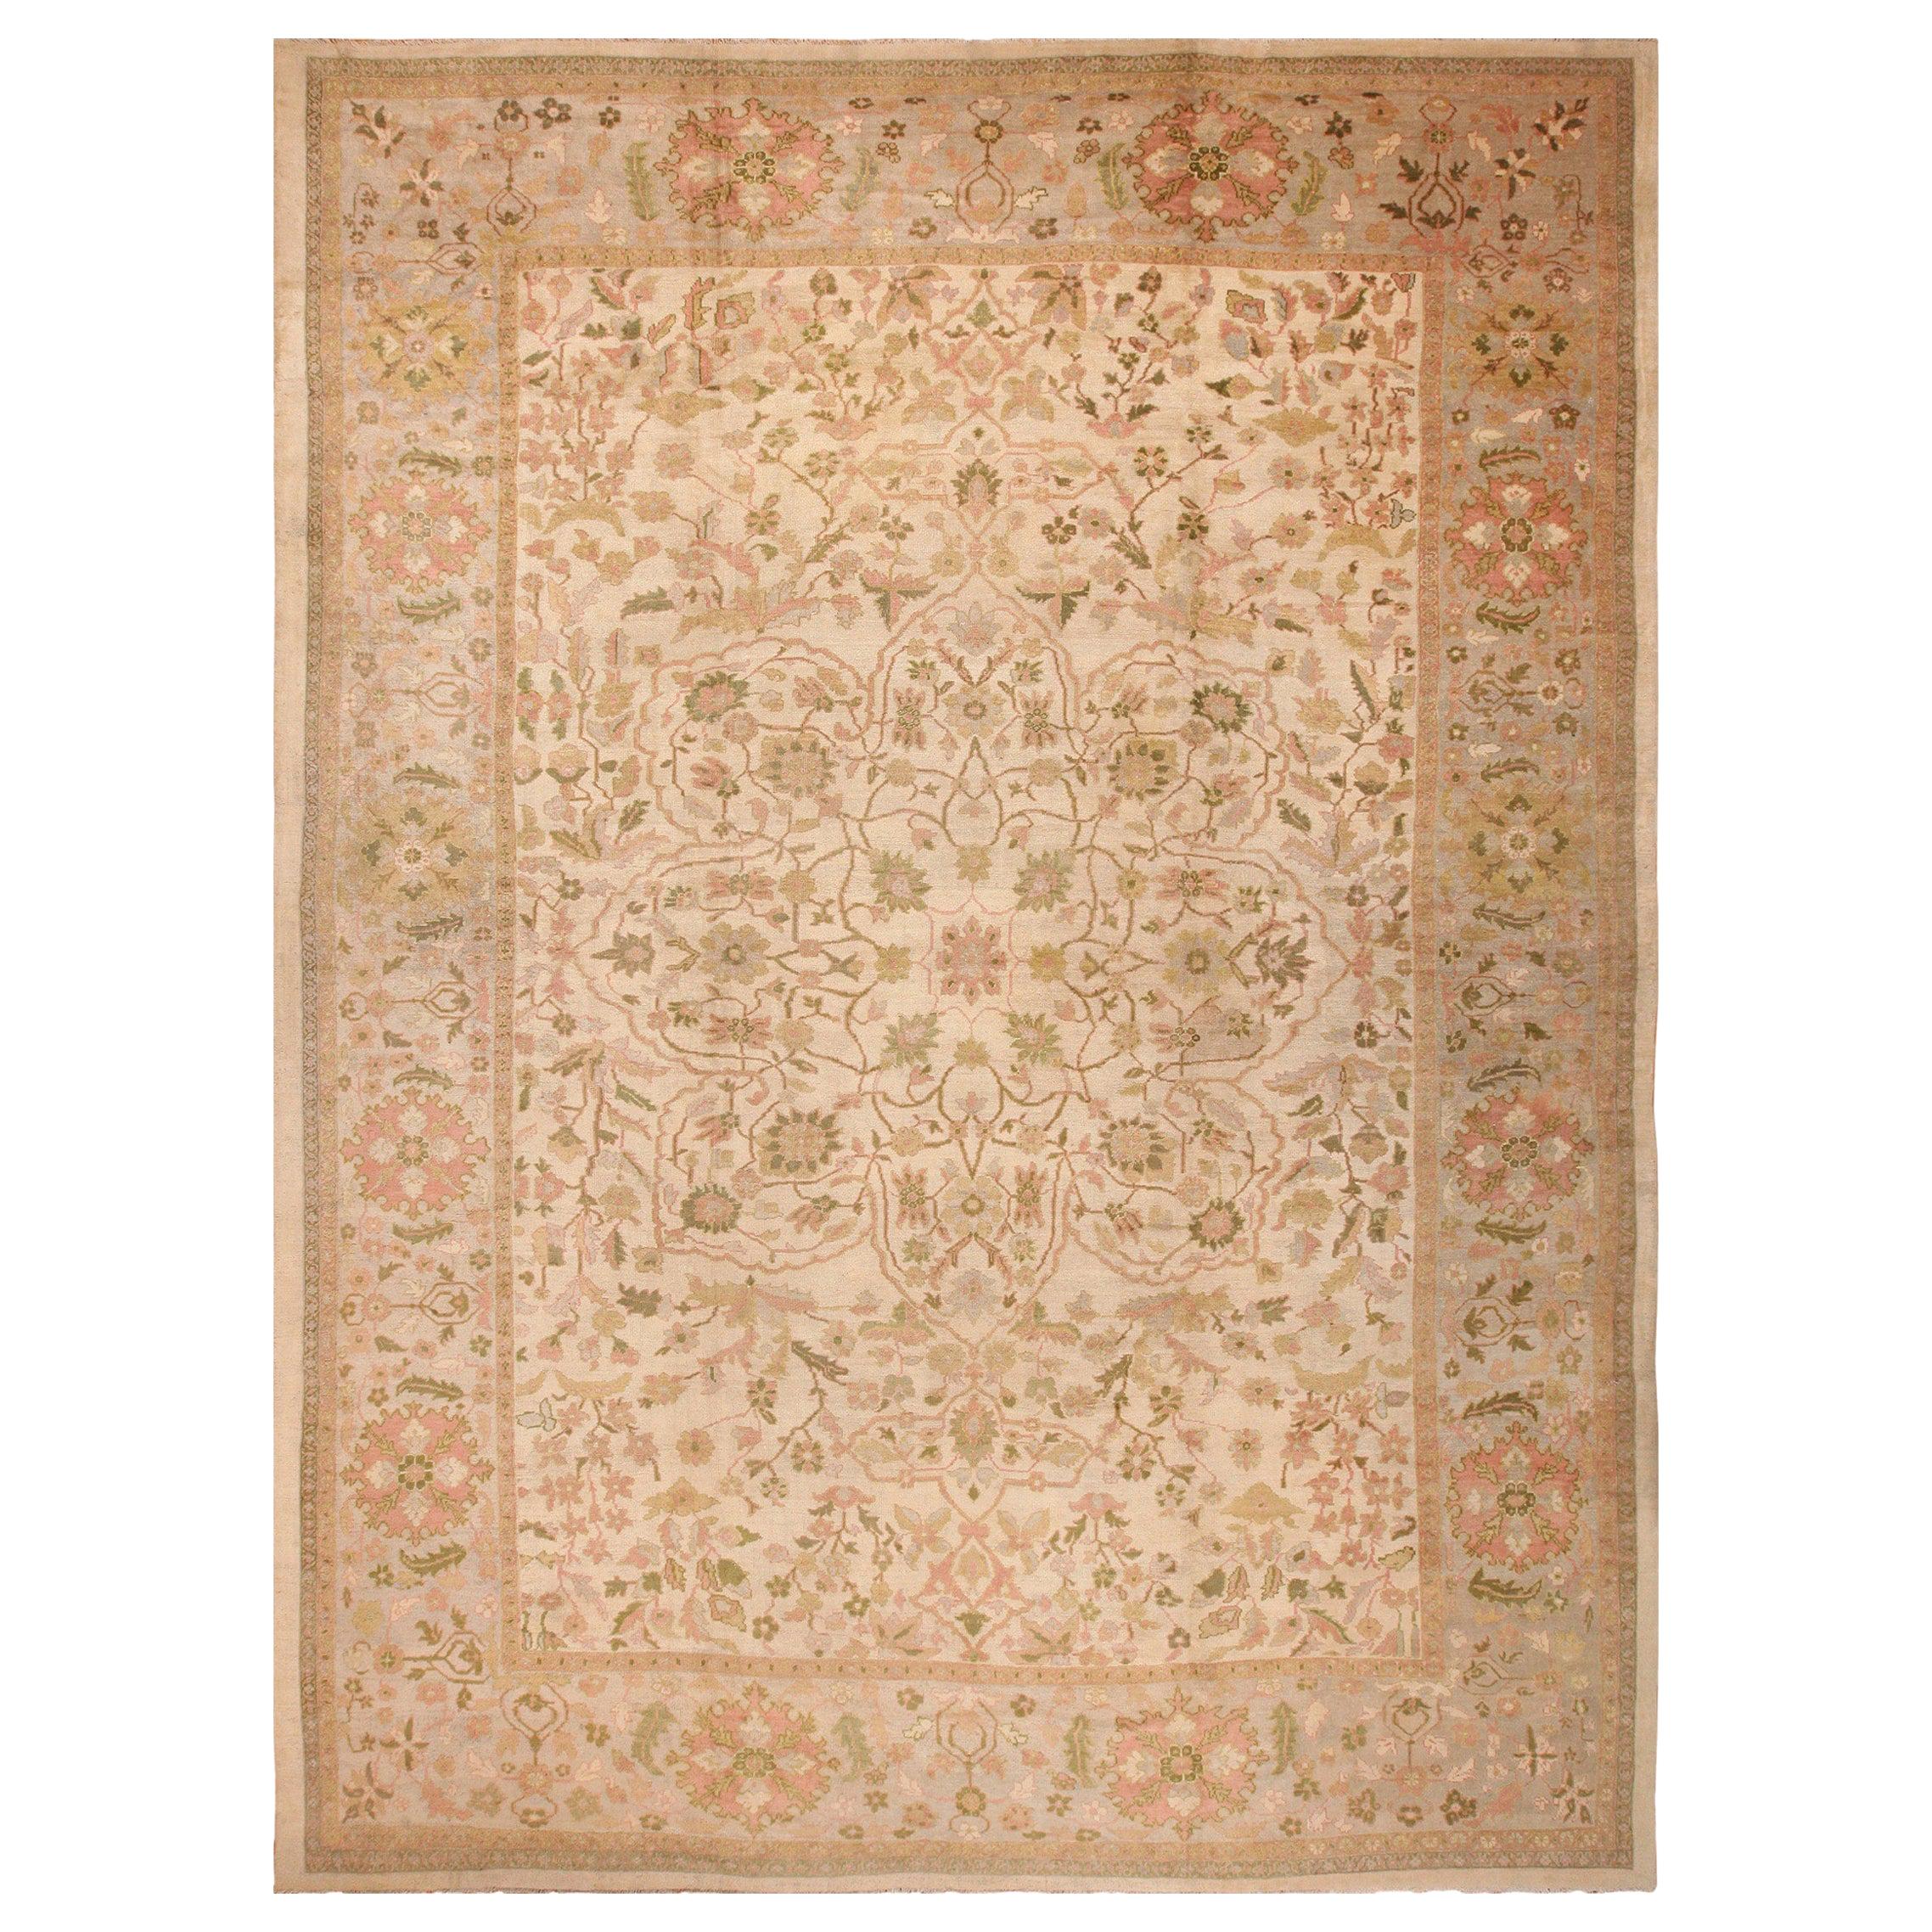 Antique Persian Sultanabad Rug. Size: 13 ft 9 in x 18 ft 5 in